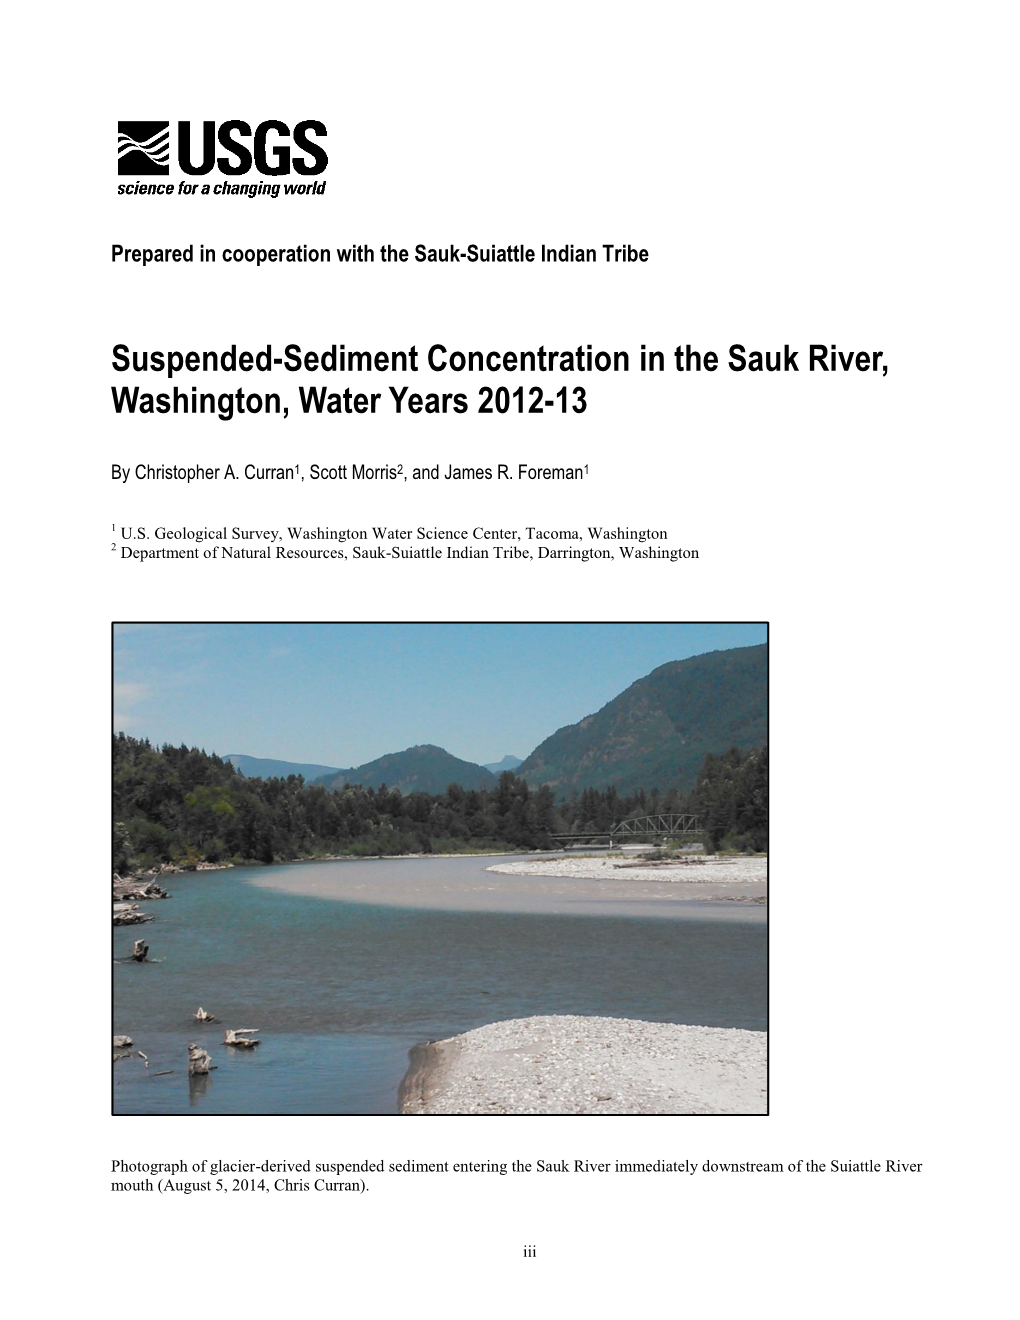 Suspended-Sediment Concentration in the Sauk River, Washington, Water Years 2012-13